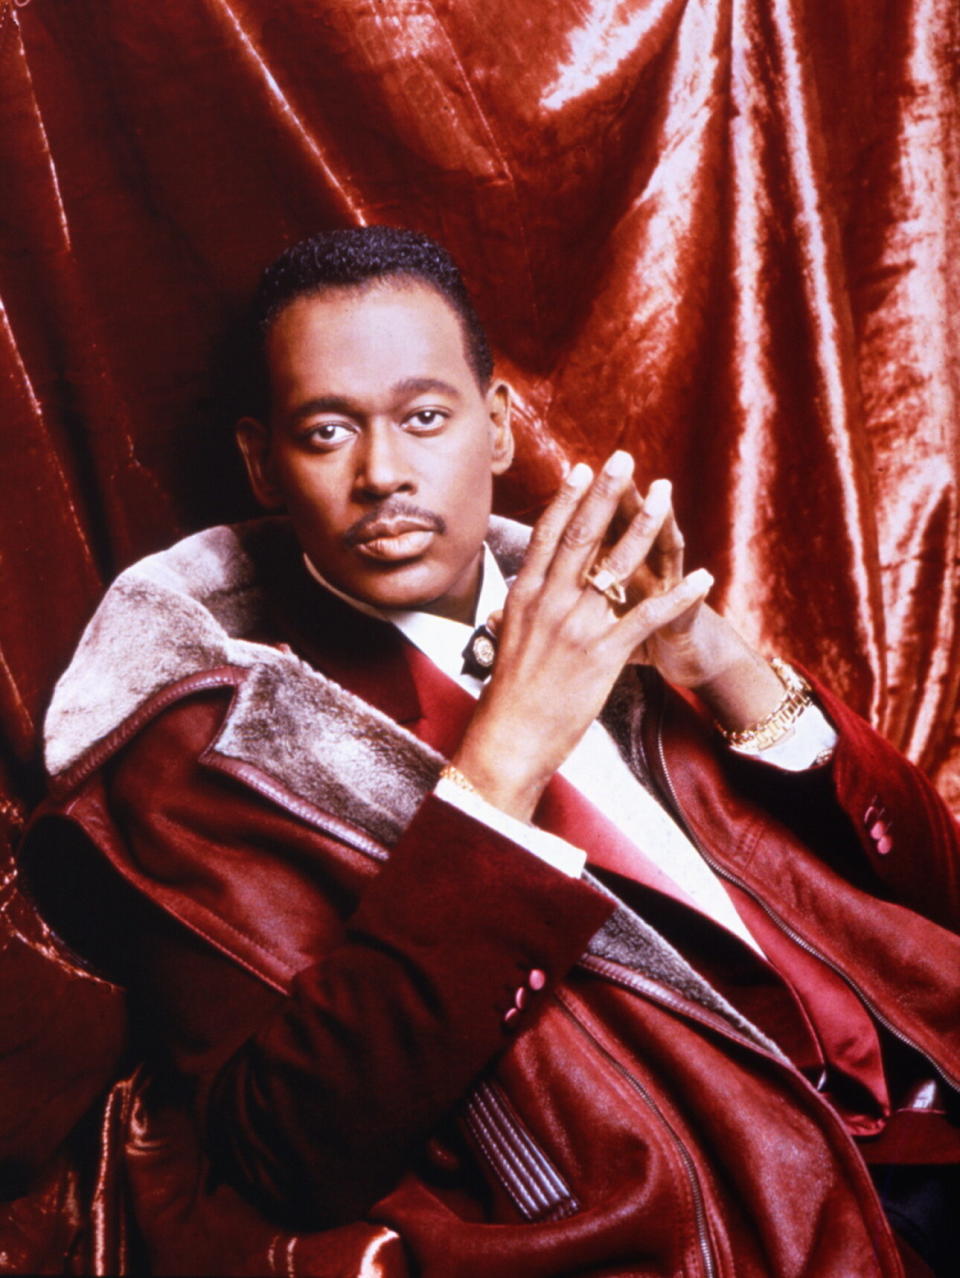 Luther Vandross, 1970. (Credit: GAB Archive/Redferns via Getty Images)